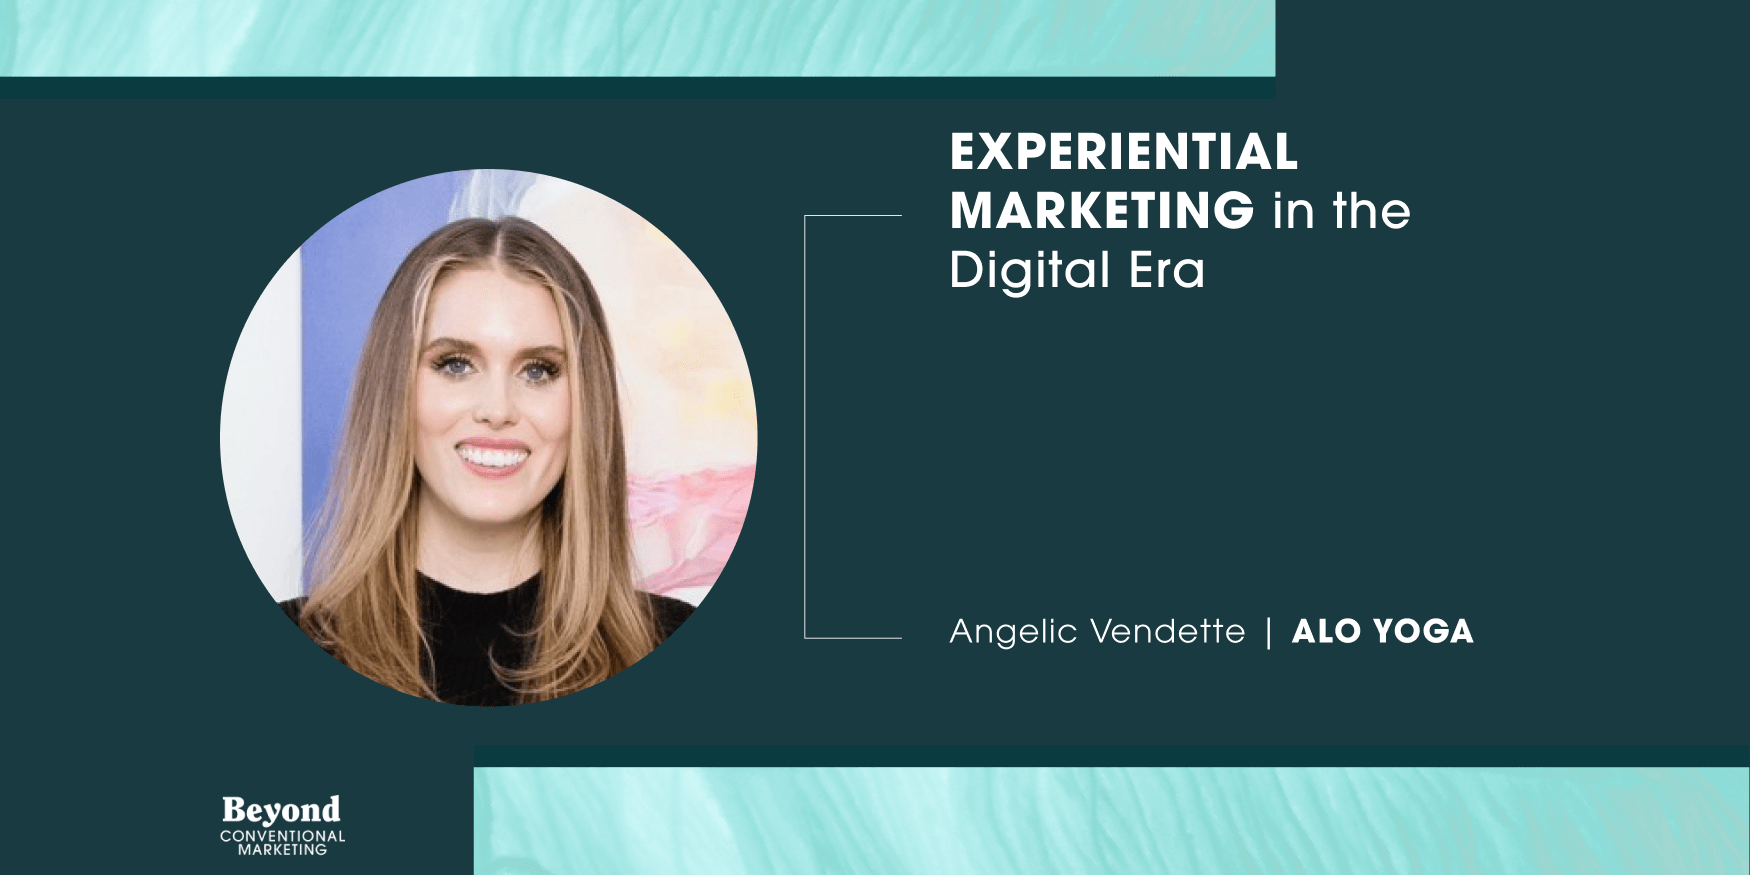 headshot of Angelic Vendette, the CMO at Alo Yoga, and text that reads experiential marketing in the digital era